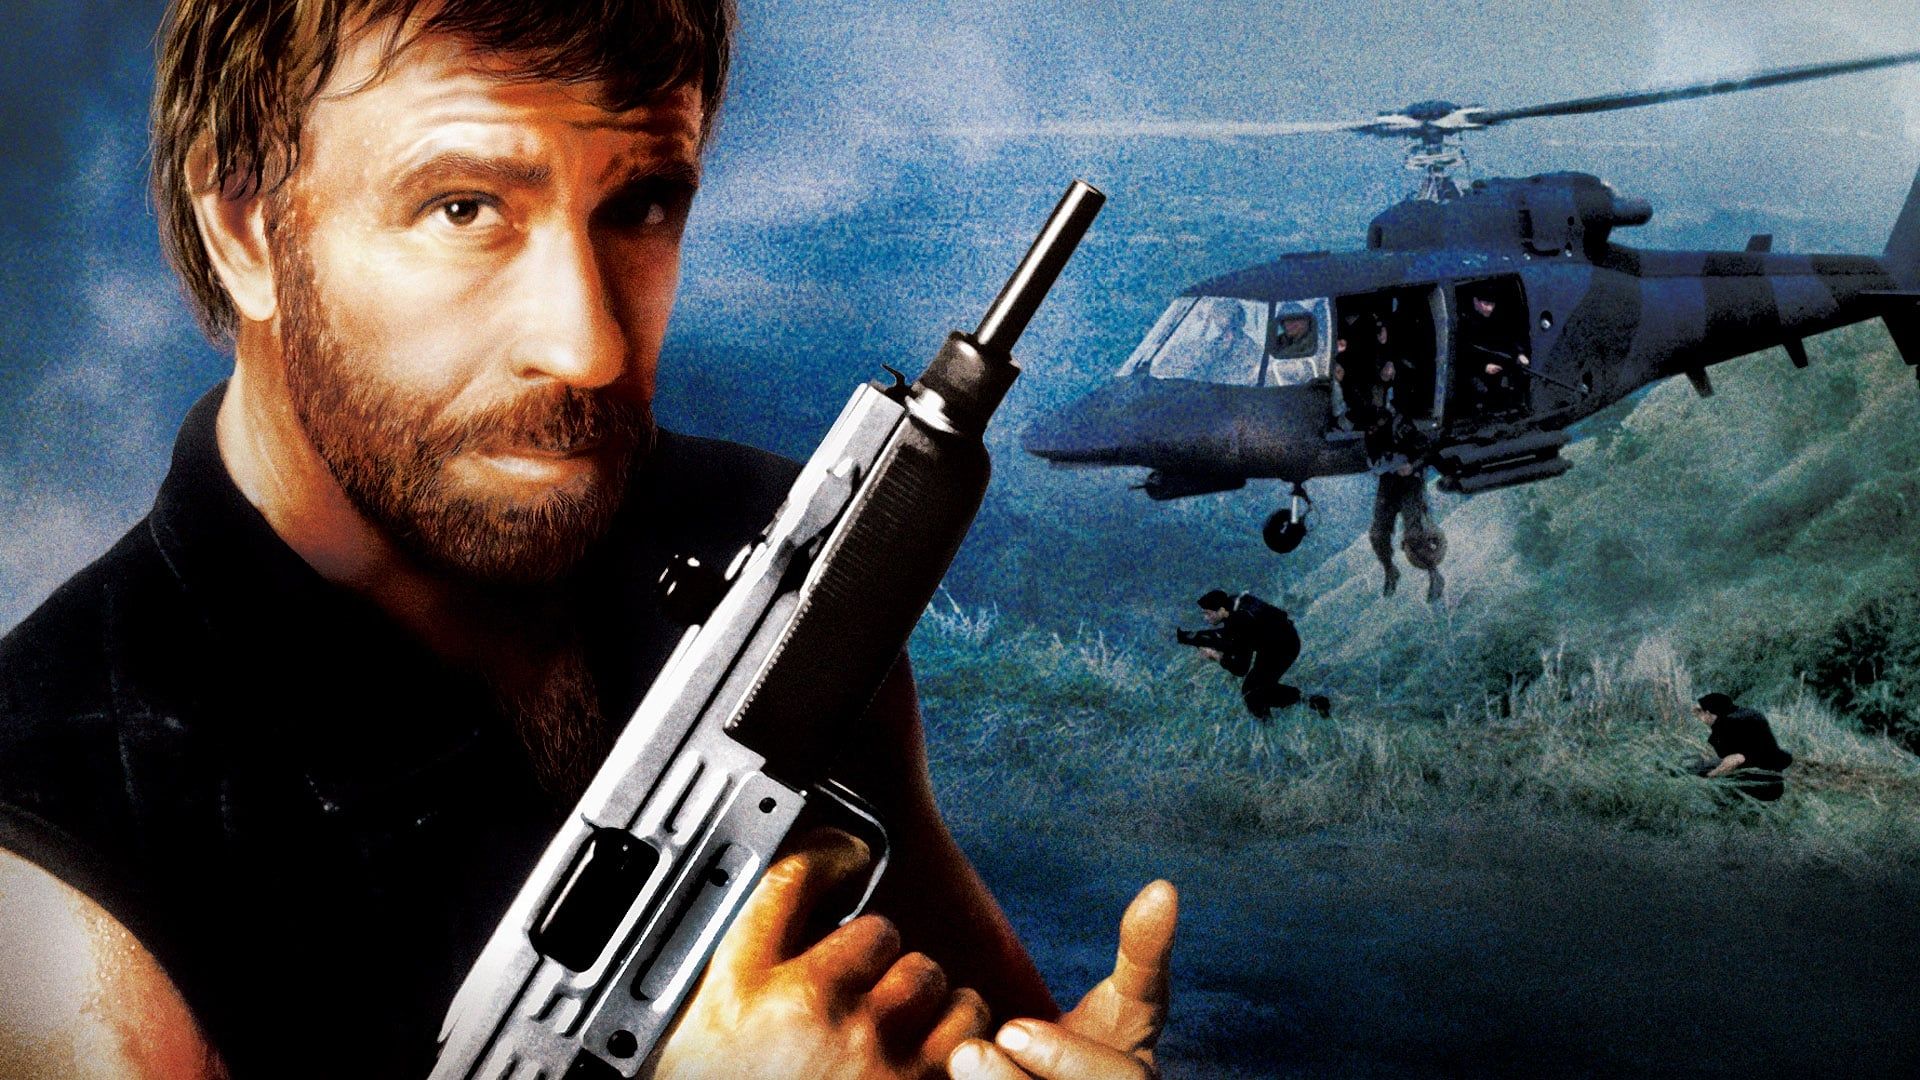 Delta Force 2: The Colombian Connection Backdrop